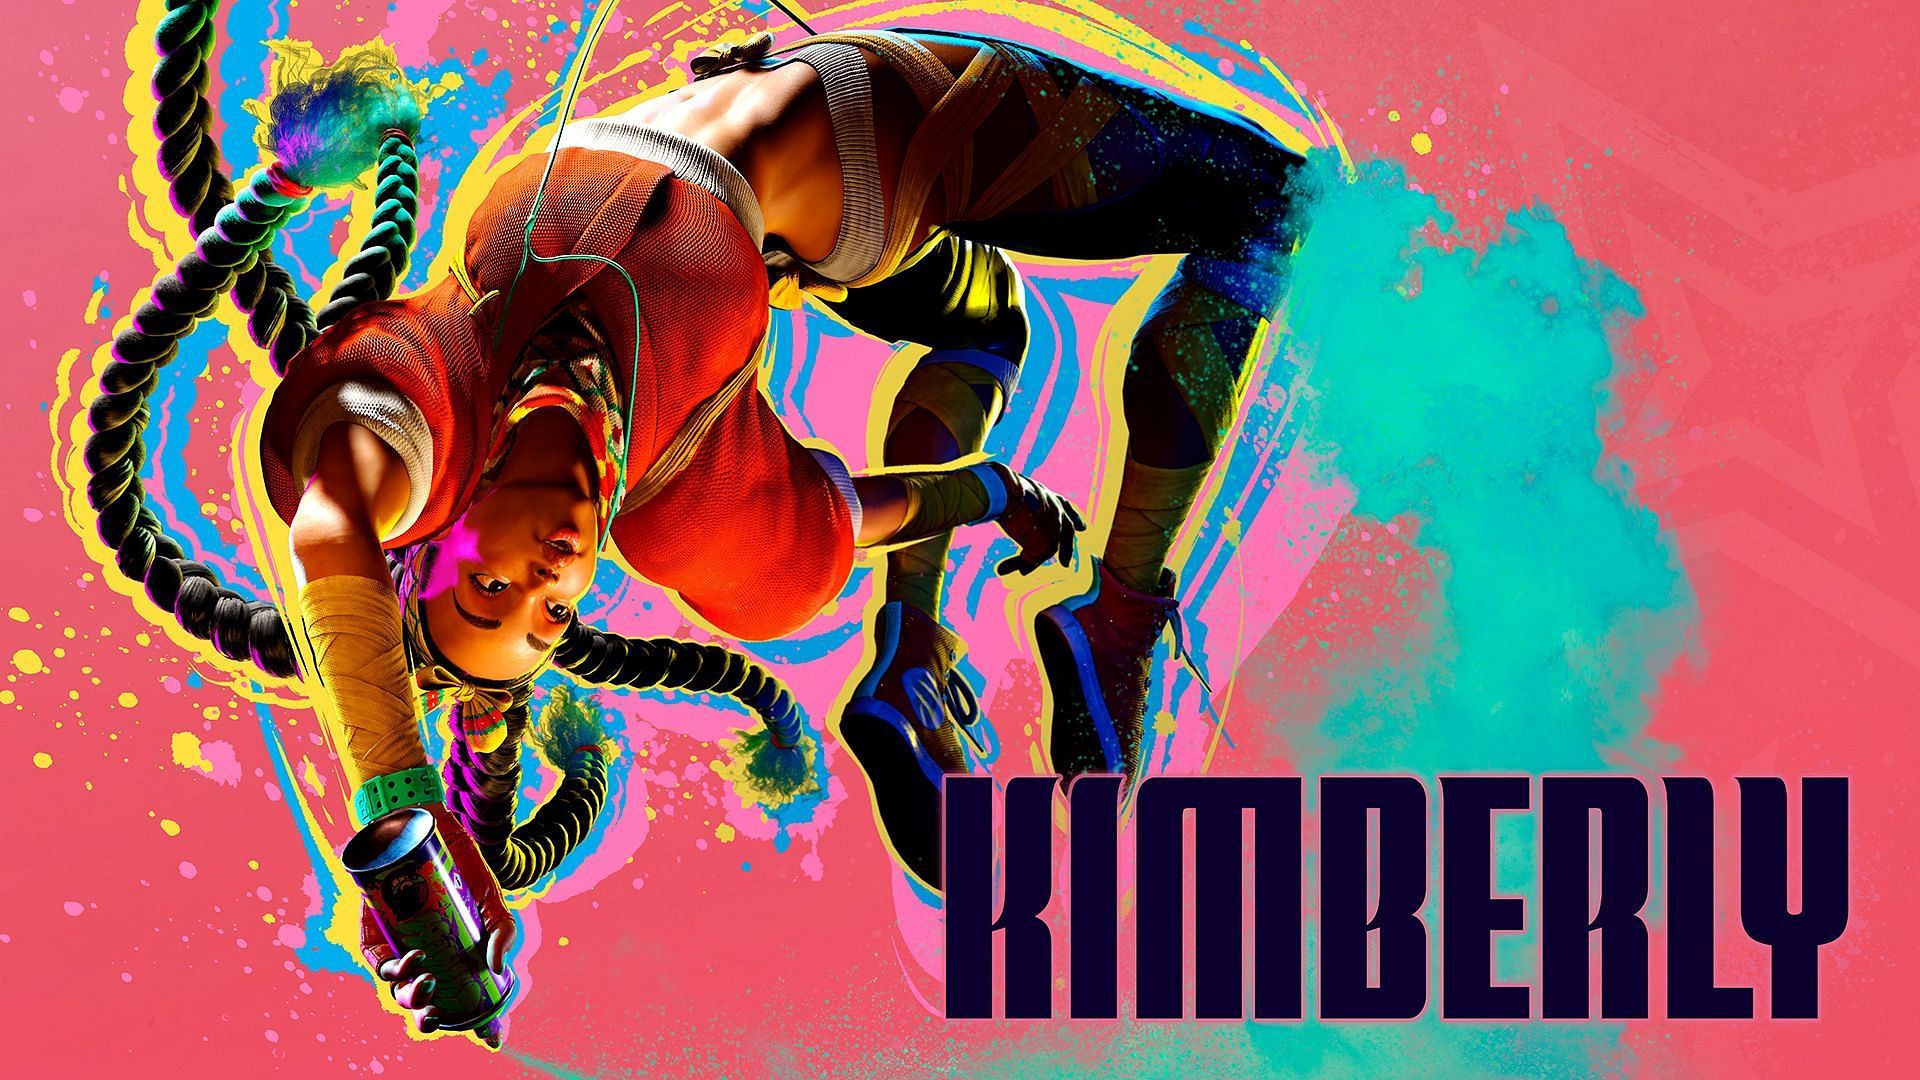 Kimberly is one of the new characters in Street Fighter 6 (Image via Capcom)